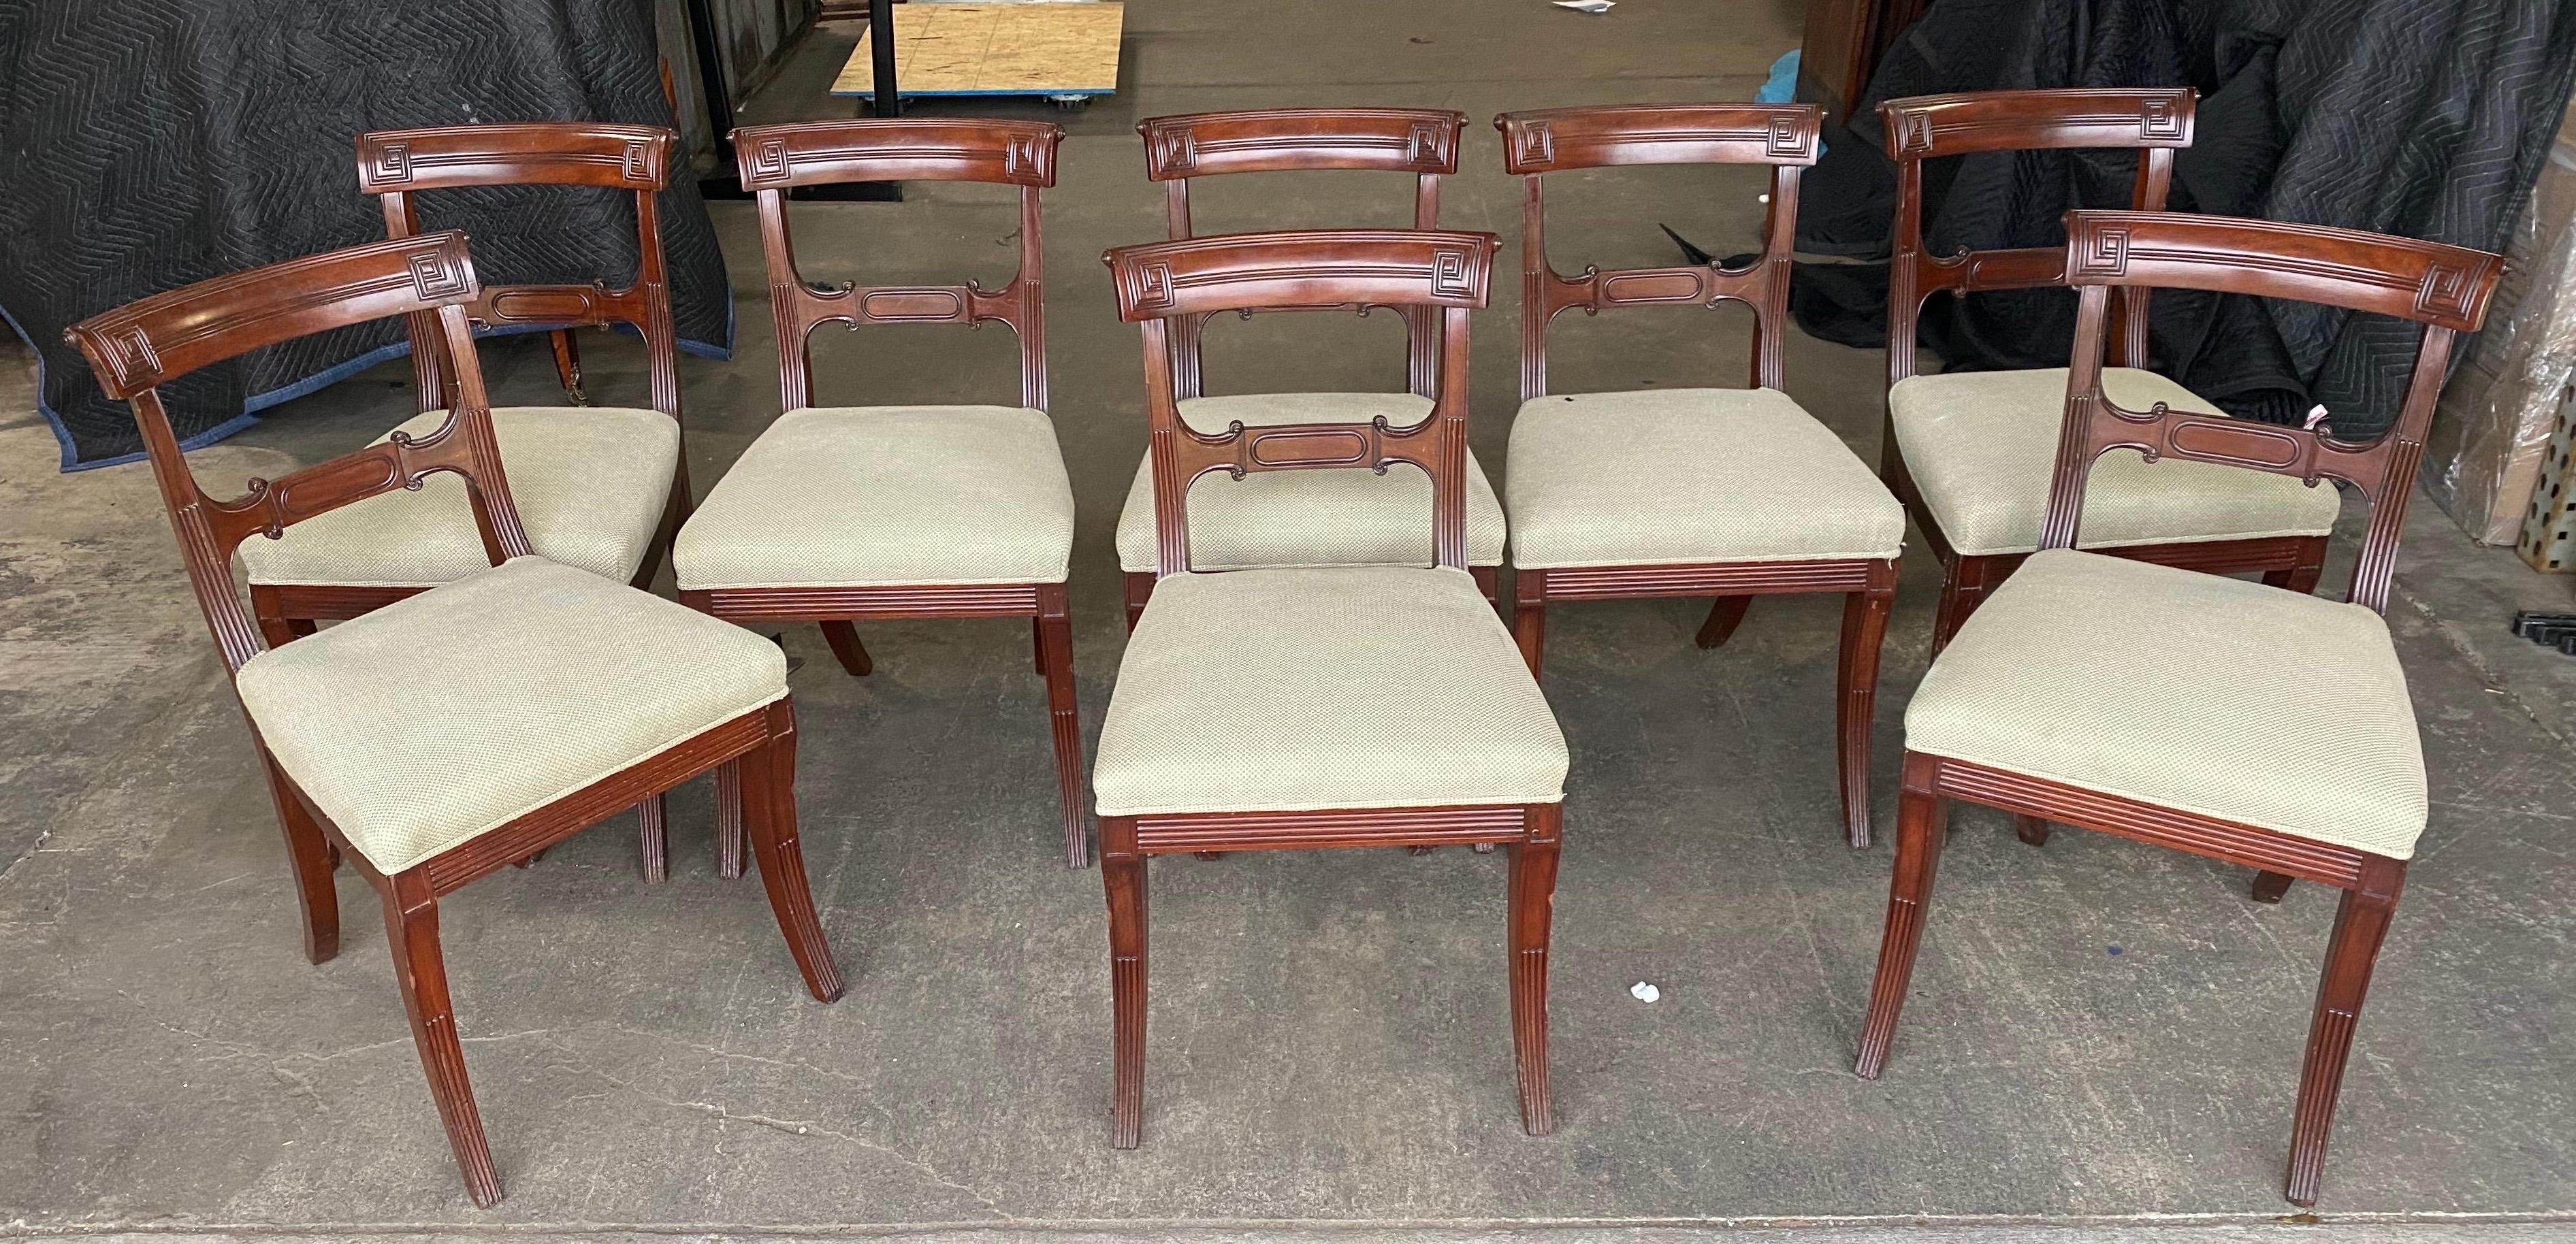 Great set of 8 19th century English mahogany side chairs with Greek Key backsplats and saber legs.